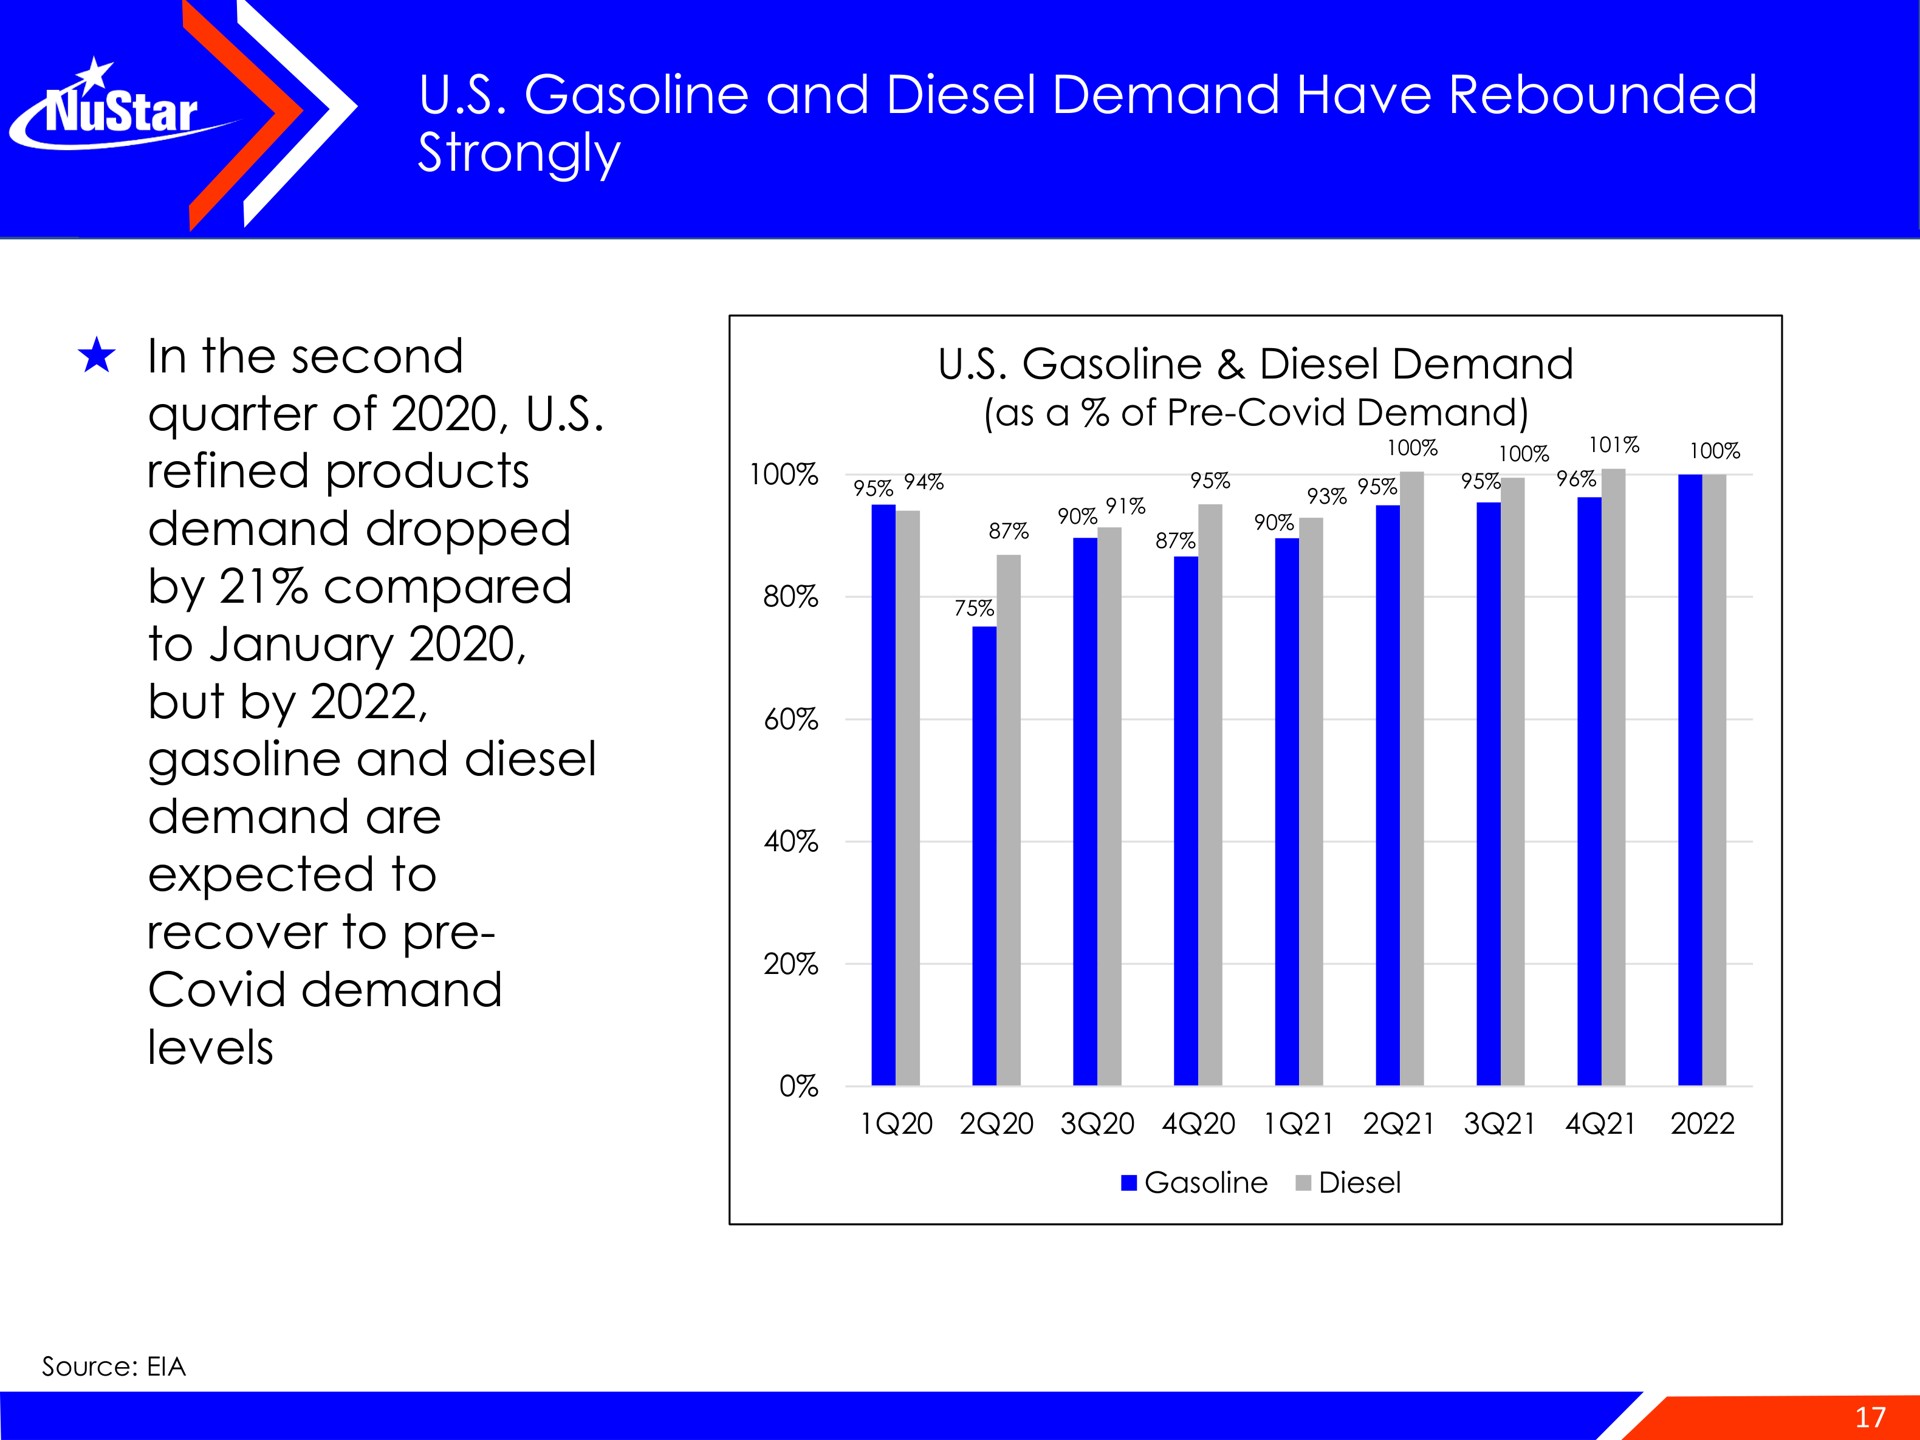 gasoline and diesel demand have rebounded strongly in the second quarter of refined products demand dropped by compared to but by gasoline and diesel demand are expected to recover to covid demand levels | NuStar Energy